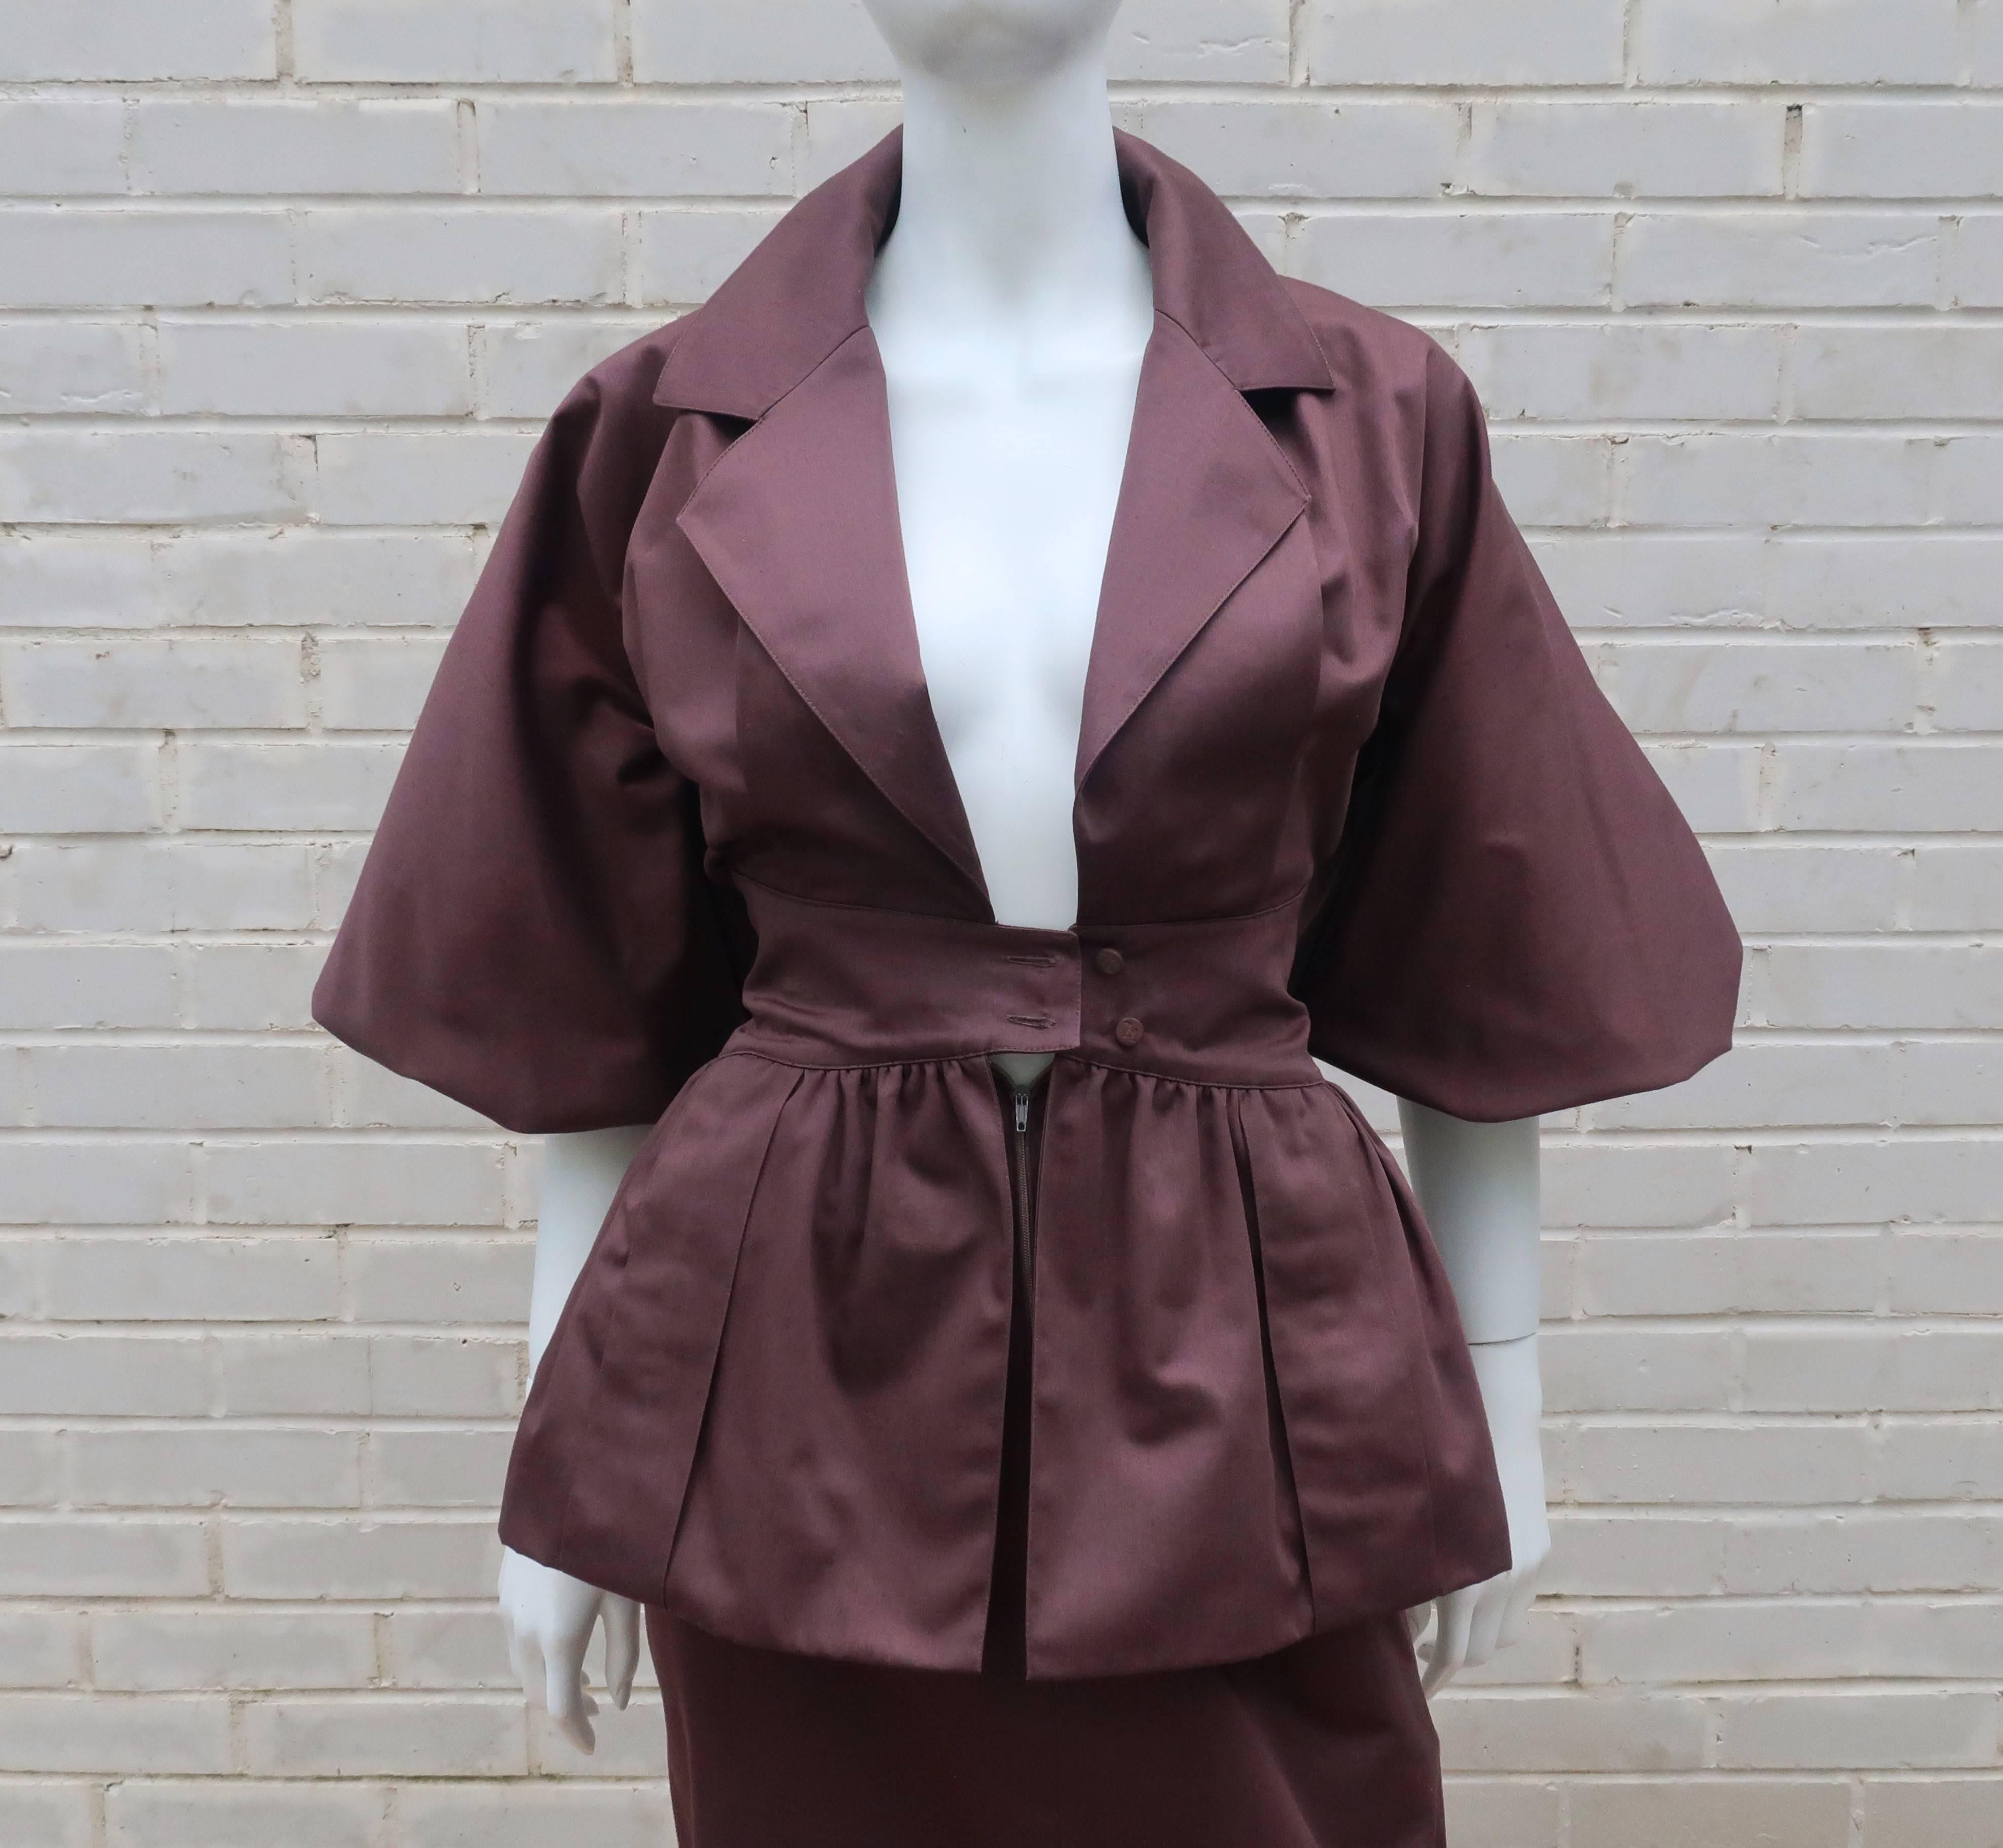 The hourglass shape of this 1980's Karl Lagerfeld silhouette is stunning.  At first glance the dress appears to be two pieces ... a peplum top and a skirt.  It's a marvelous ruse!  The one piece dress actually buttons at the waist and zips under the